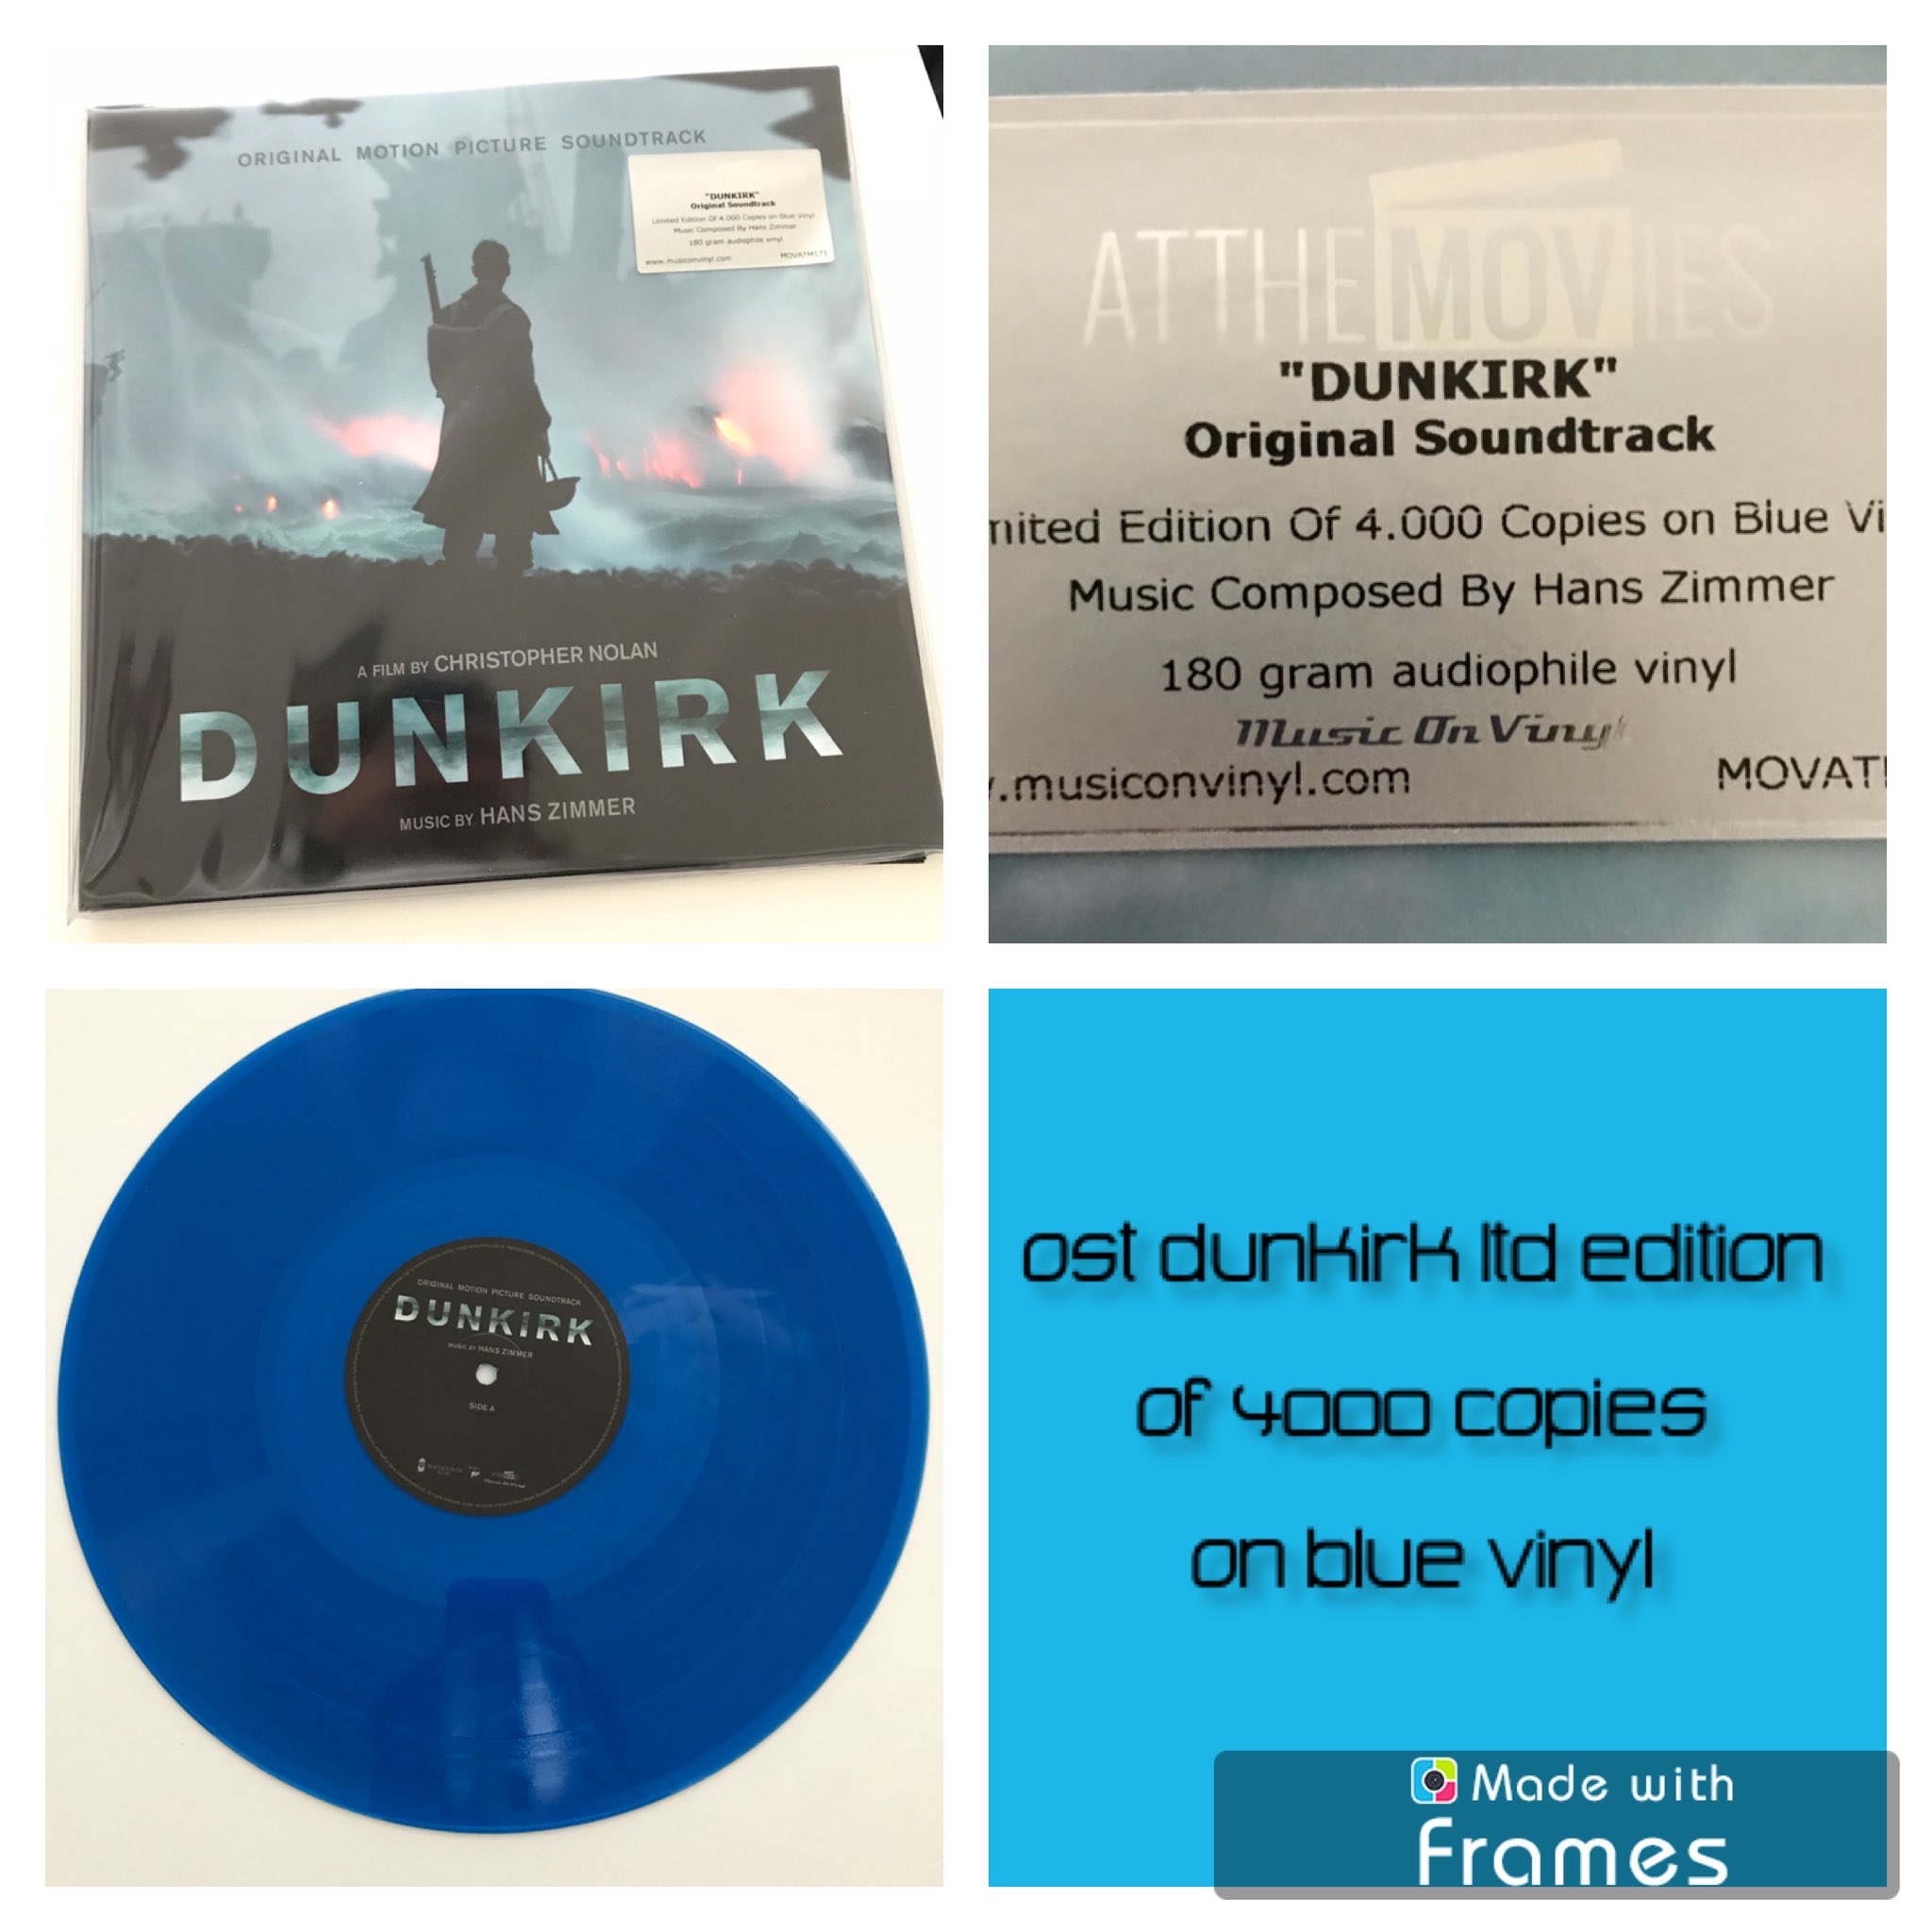 Véronique on "A special one just came in: OST Dunkirk edition of 4000 worldwide on blue vinyl #OSTDunkirk #Dunkirk #hanszimmer #vinyl https://t.co/yCnHIovru9" / Twitter